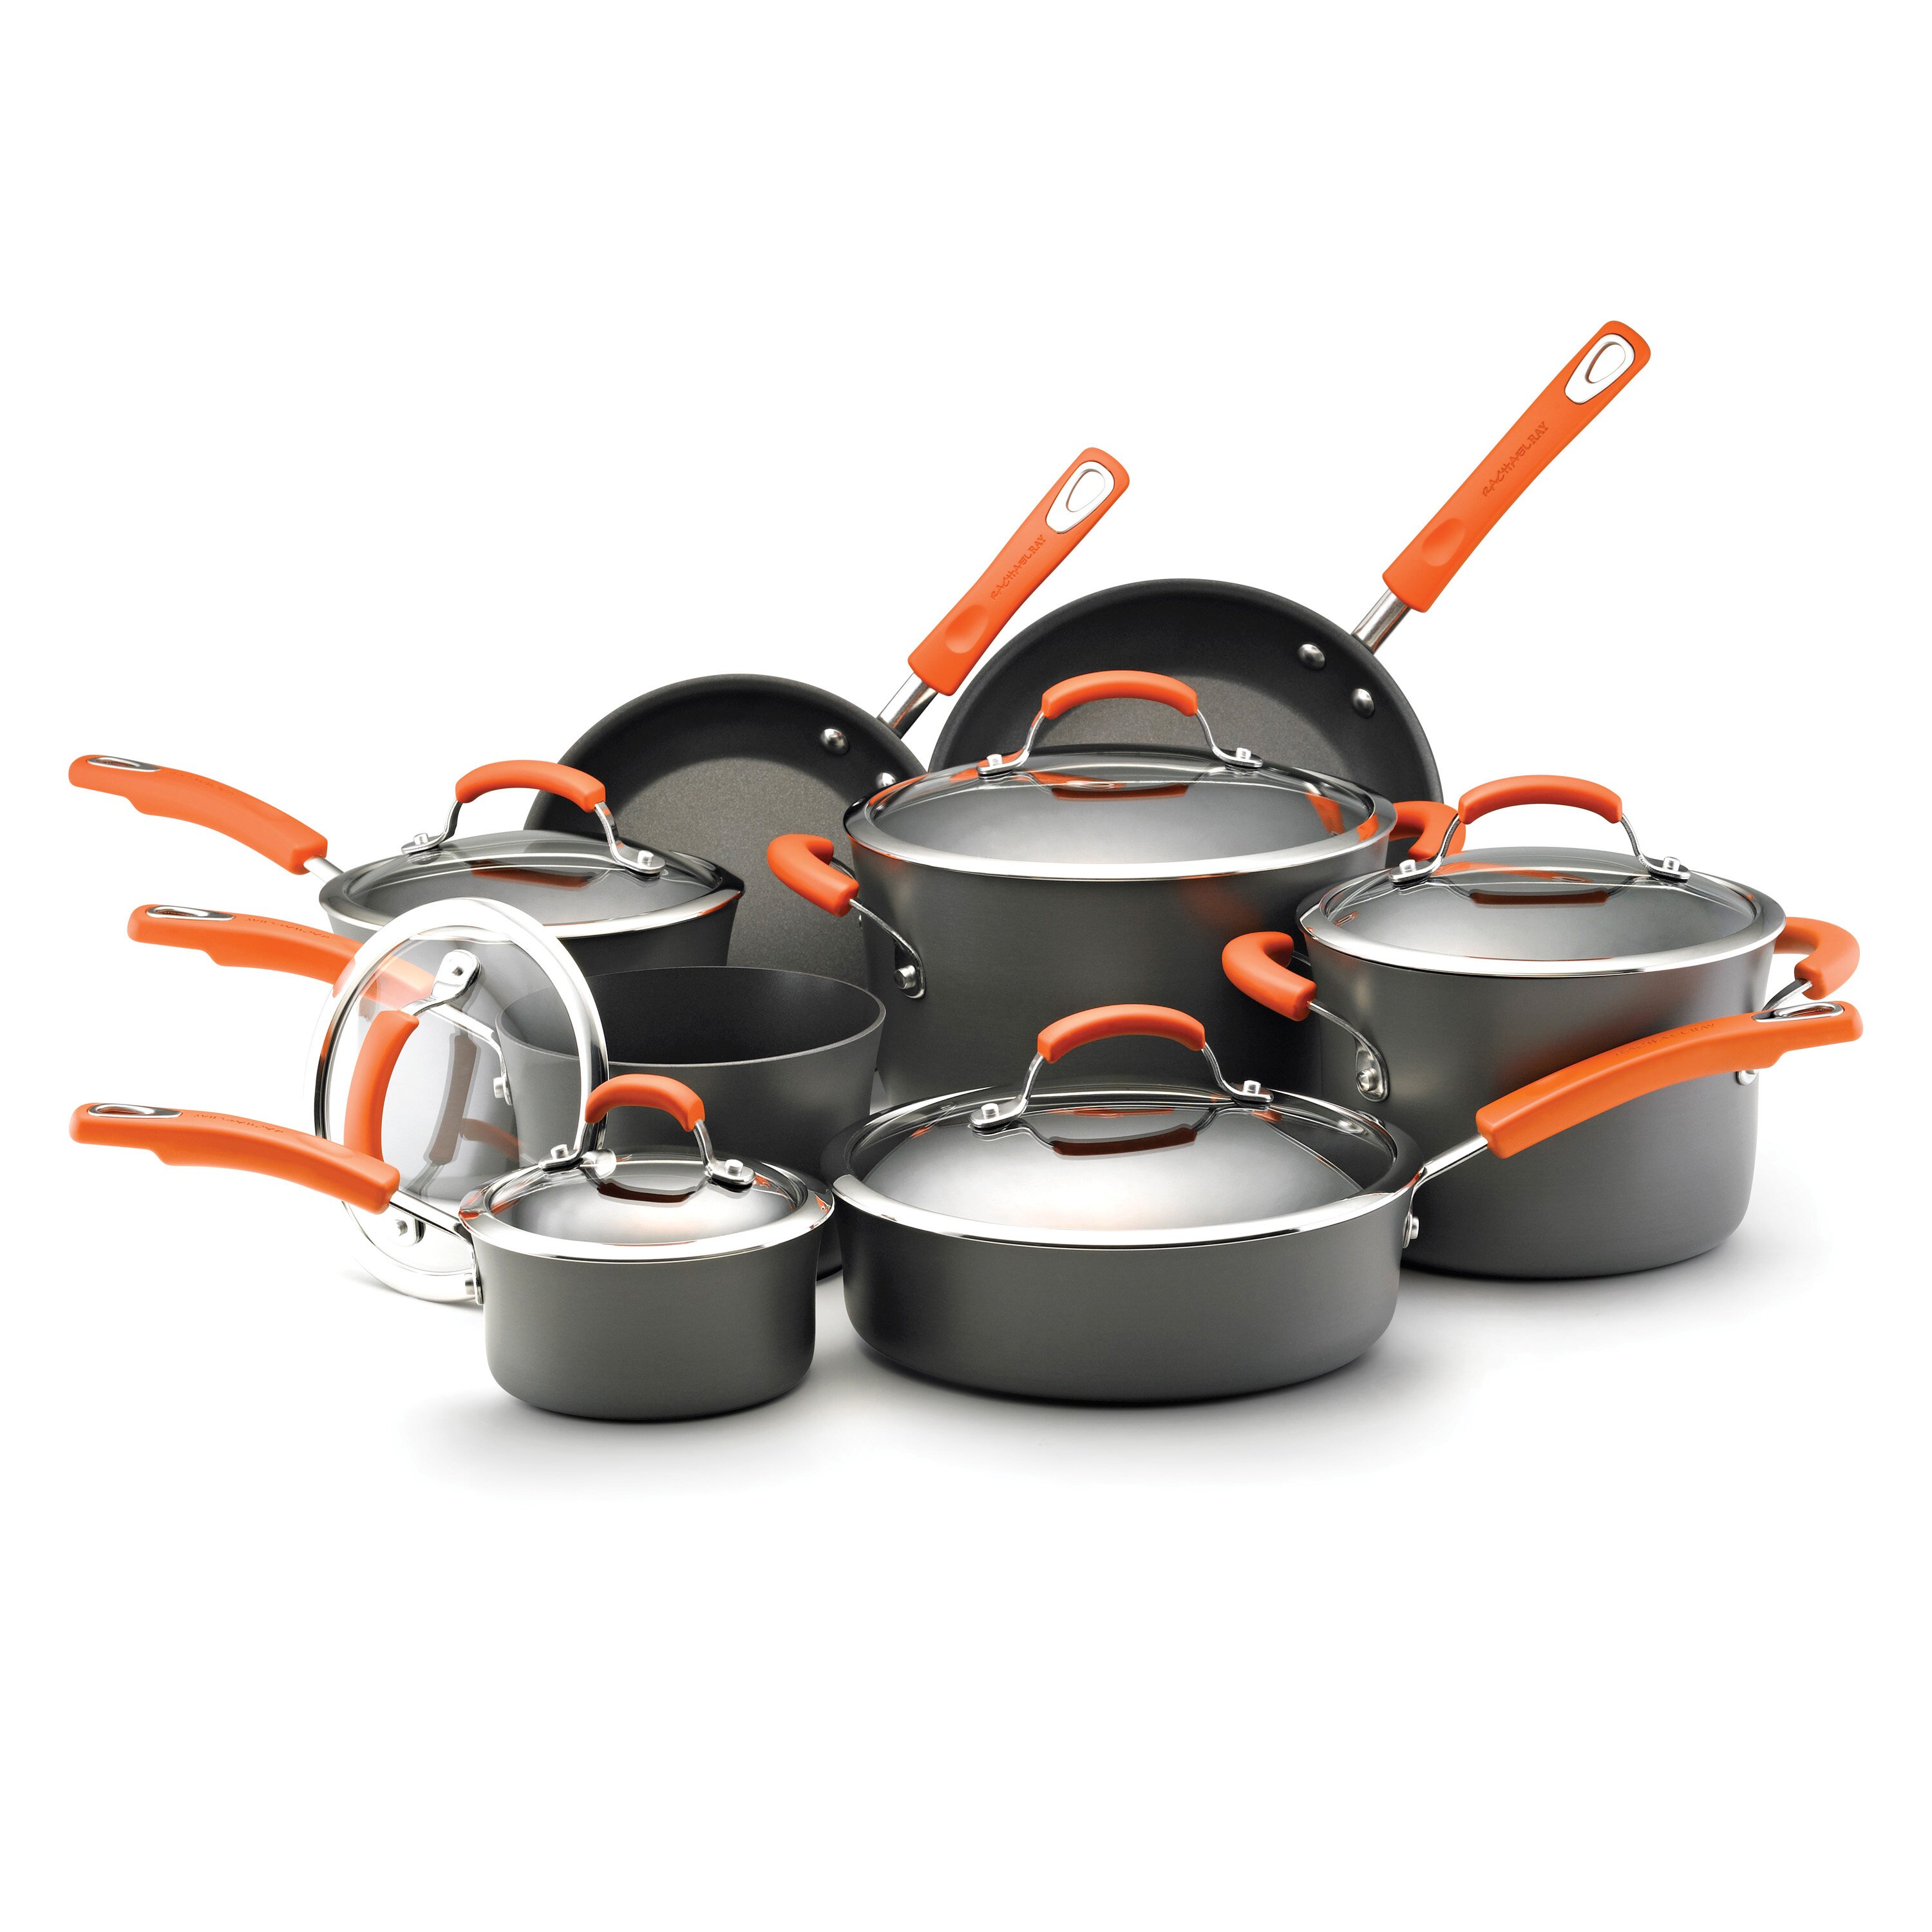 Rachael Ray Hard Anodized Nonstick 14 Piece Cookware Set And Reviews